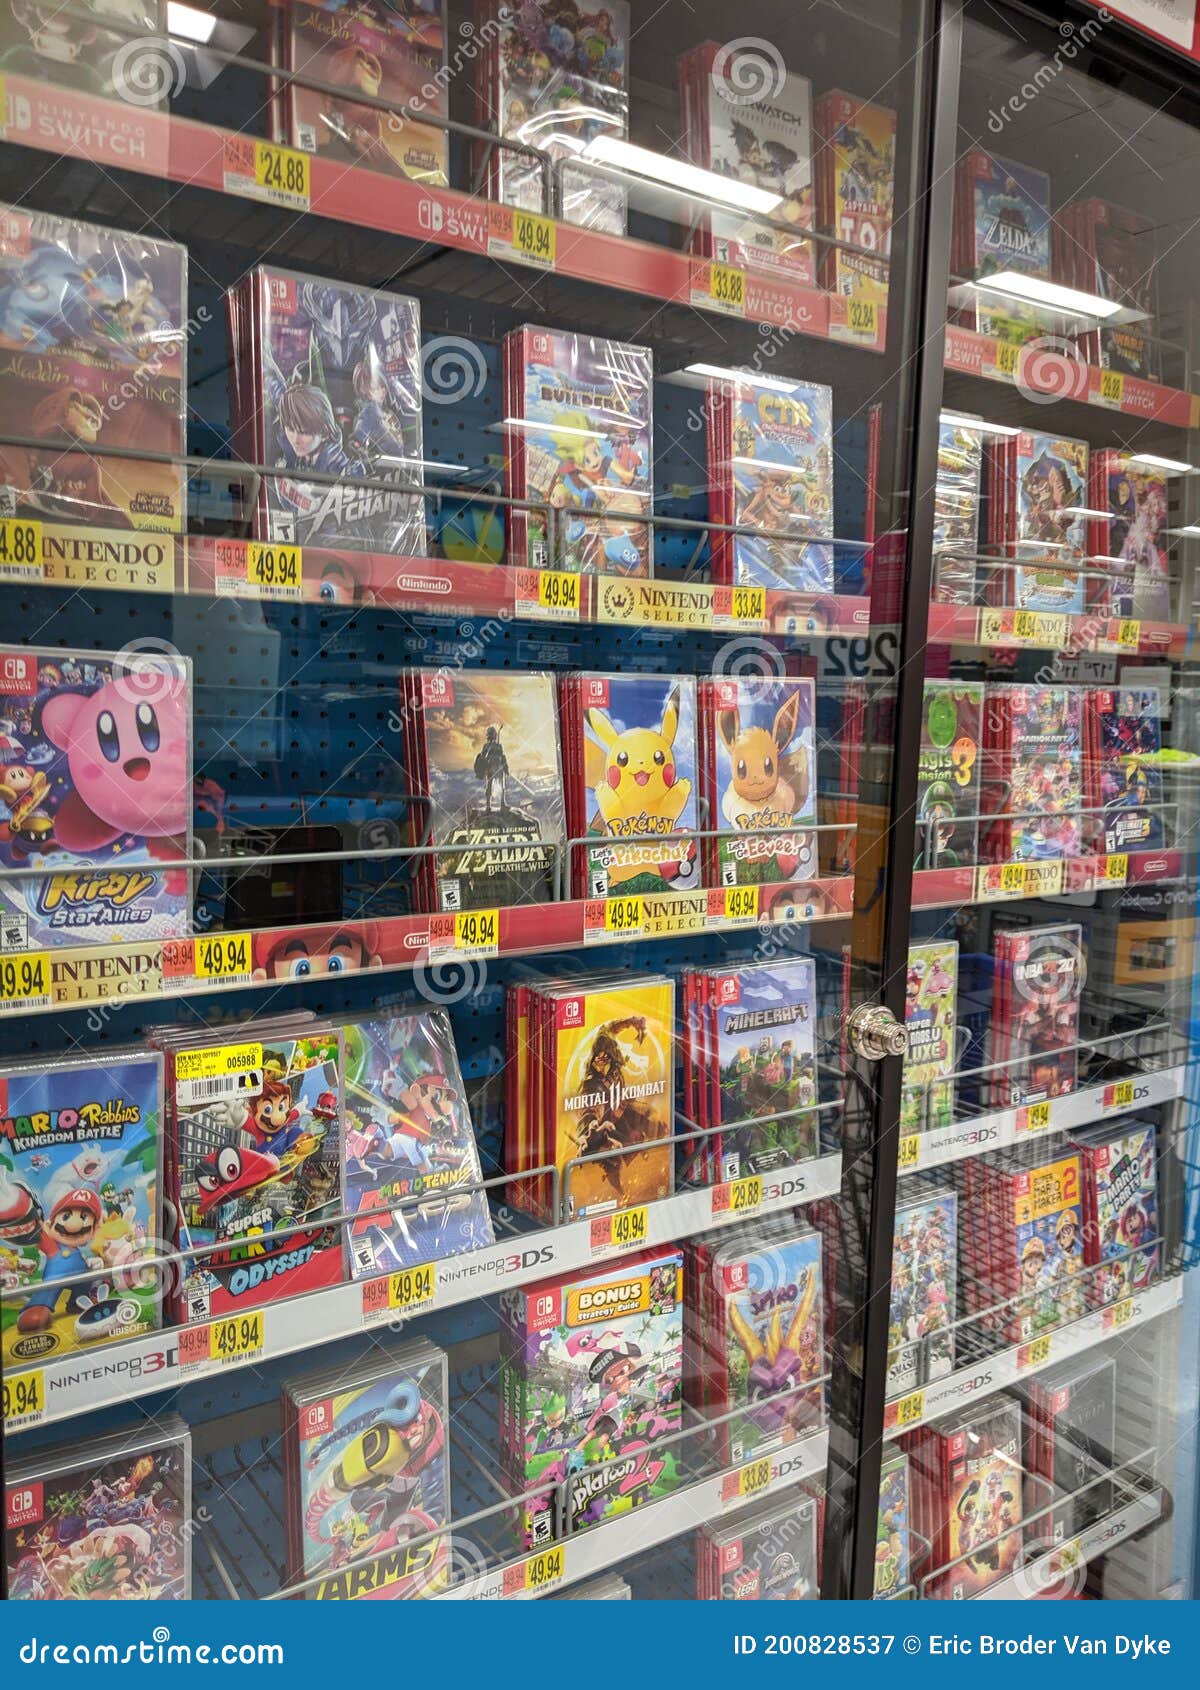 Nintendo Switch Games On Display At Walmart Editorial Photography Image Of Kong Games 200828537